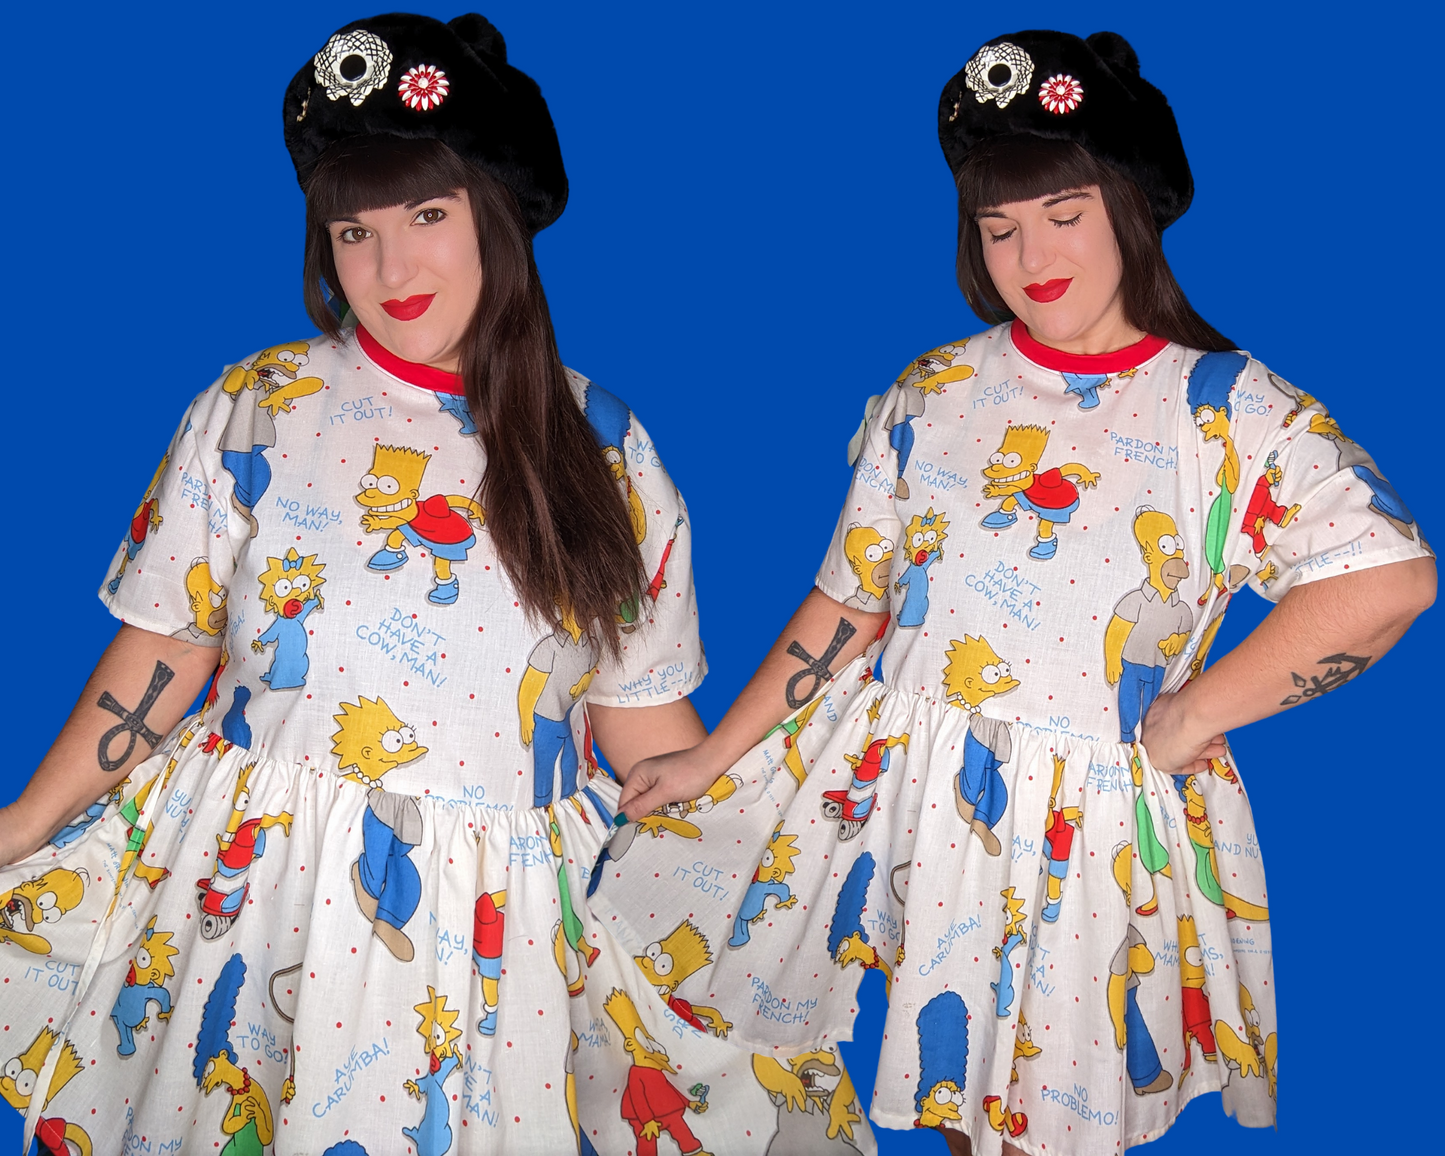 Handmade, Upcycled The Simpsons Bedsheet T-Shirt Dress Fits S-M-L-XL